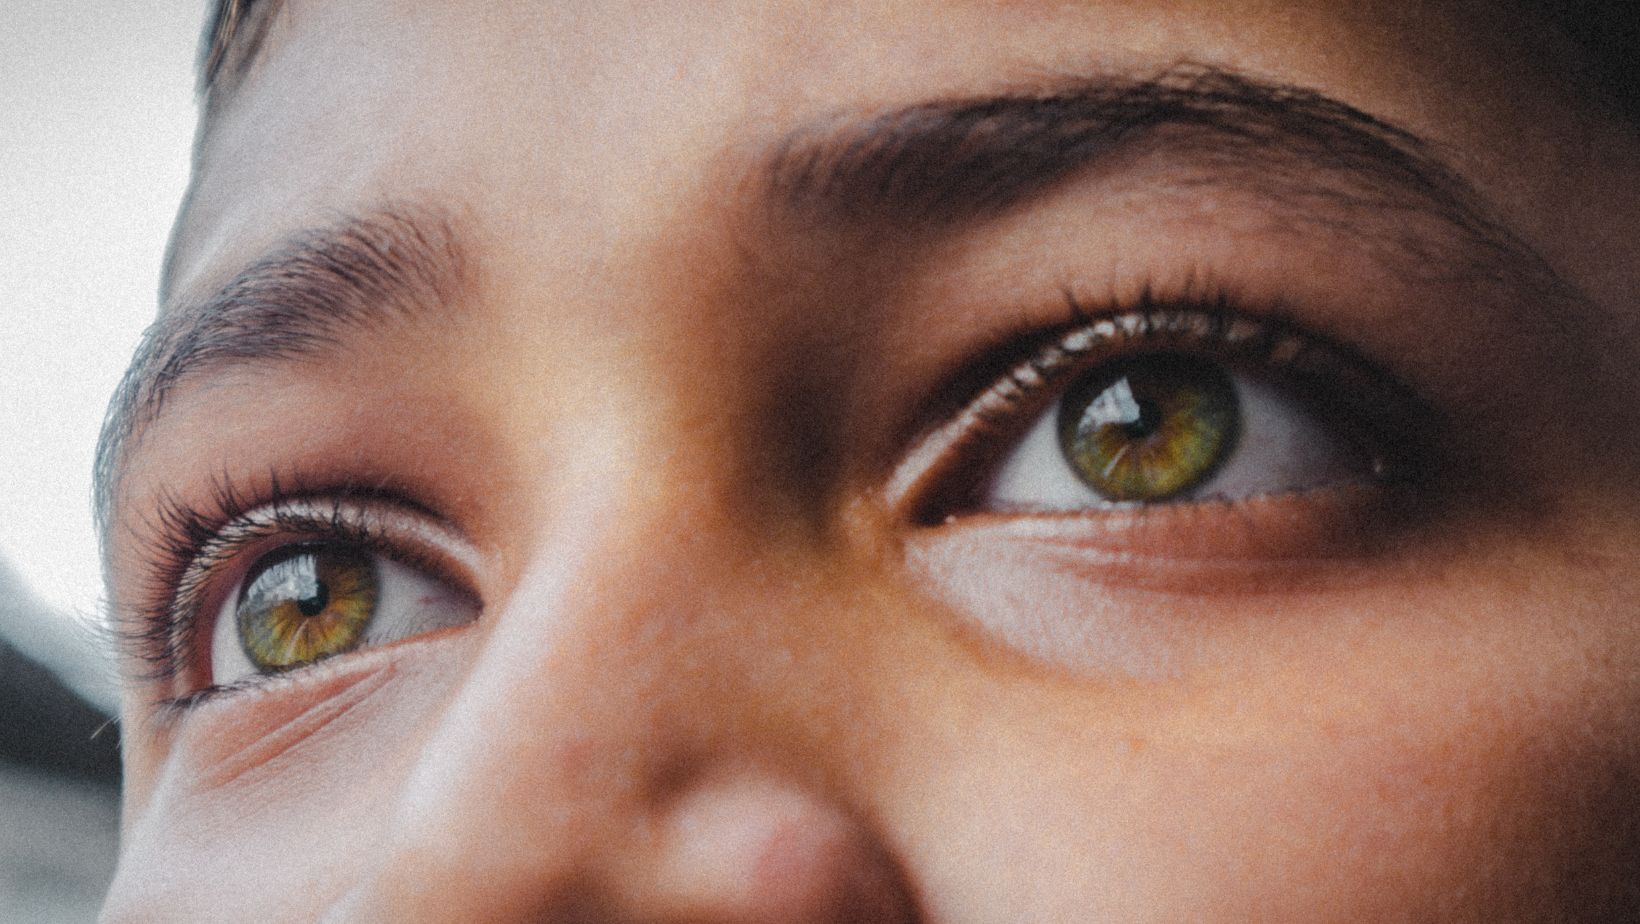 A photo of the top of someone's face with green eyes.